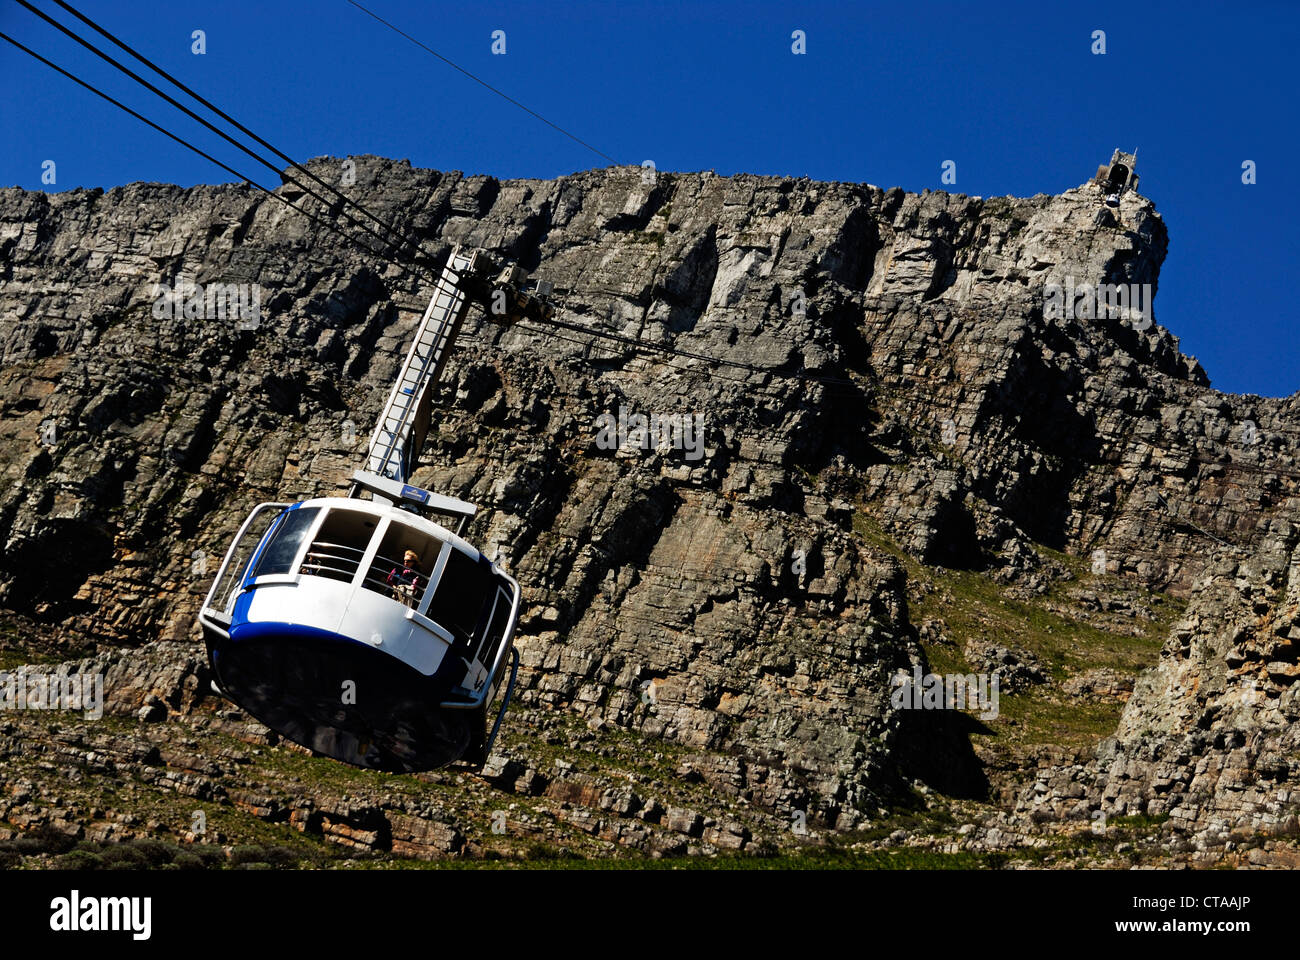 Cable car, Table Mountain, Cape Town, Western Cape Province, South Africa Stock Photo